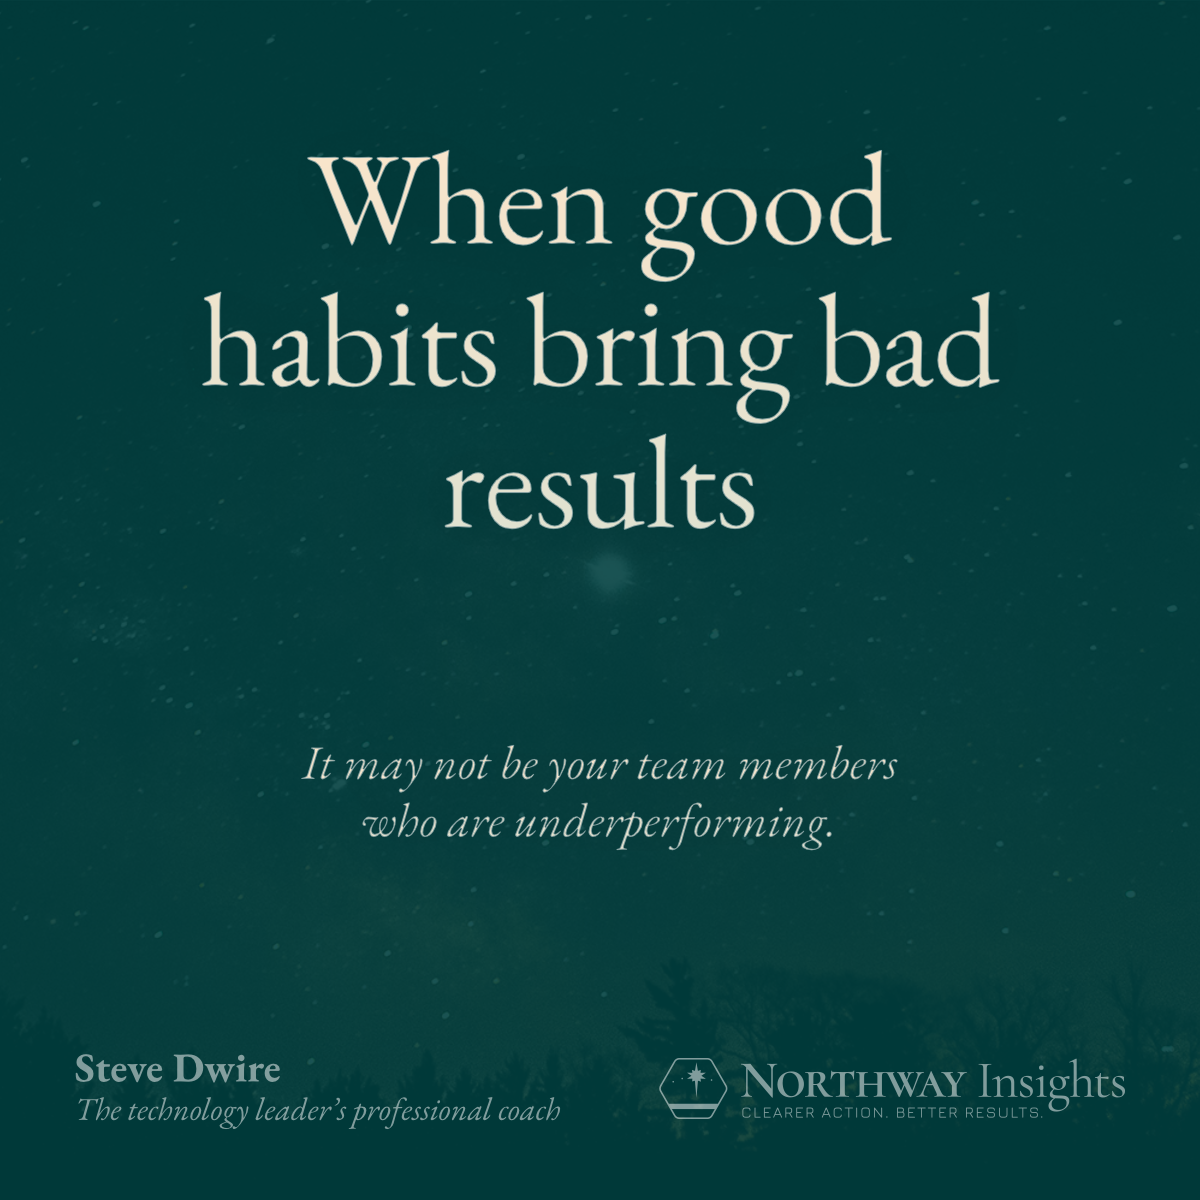 When good habits bring bad results (It may not be your team members who are underperforming.)